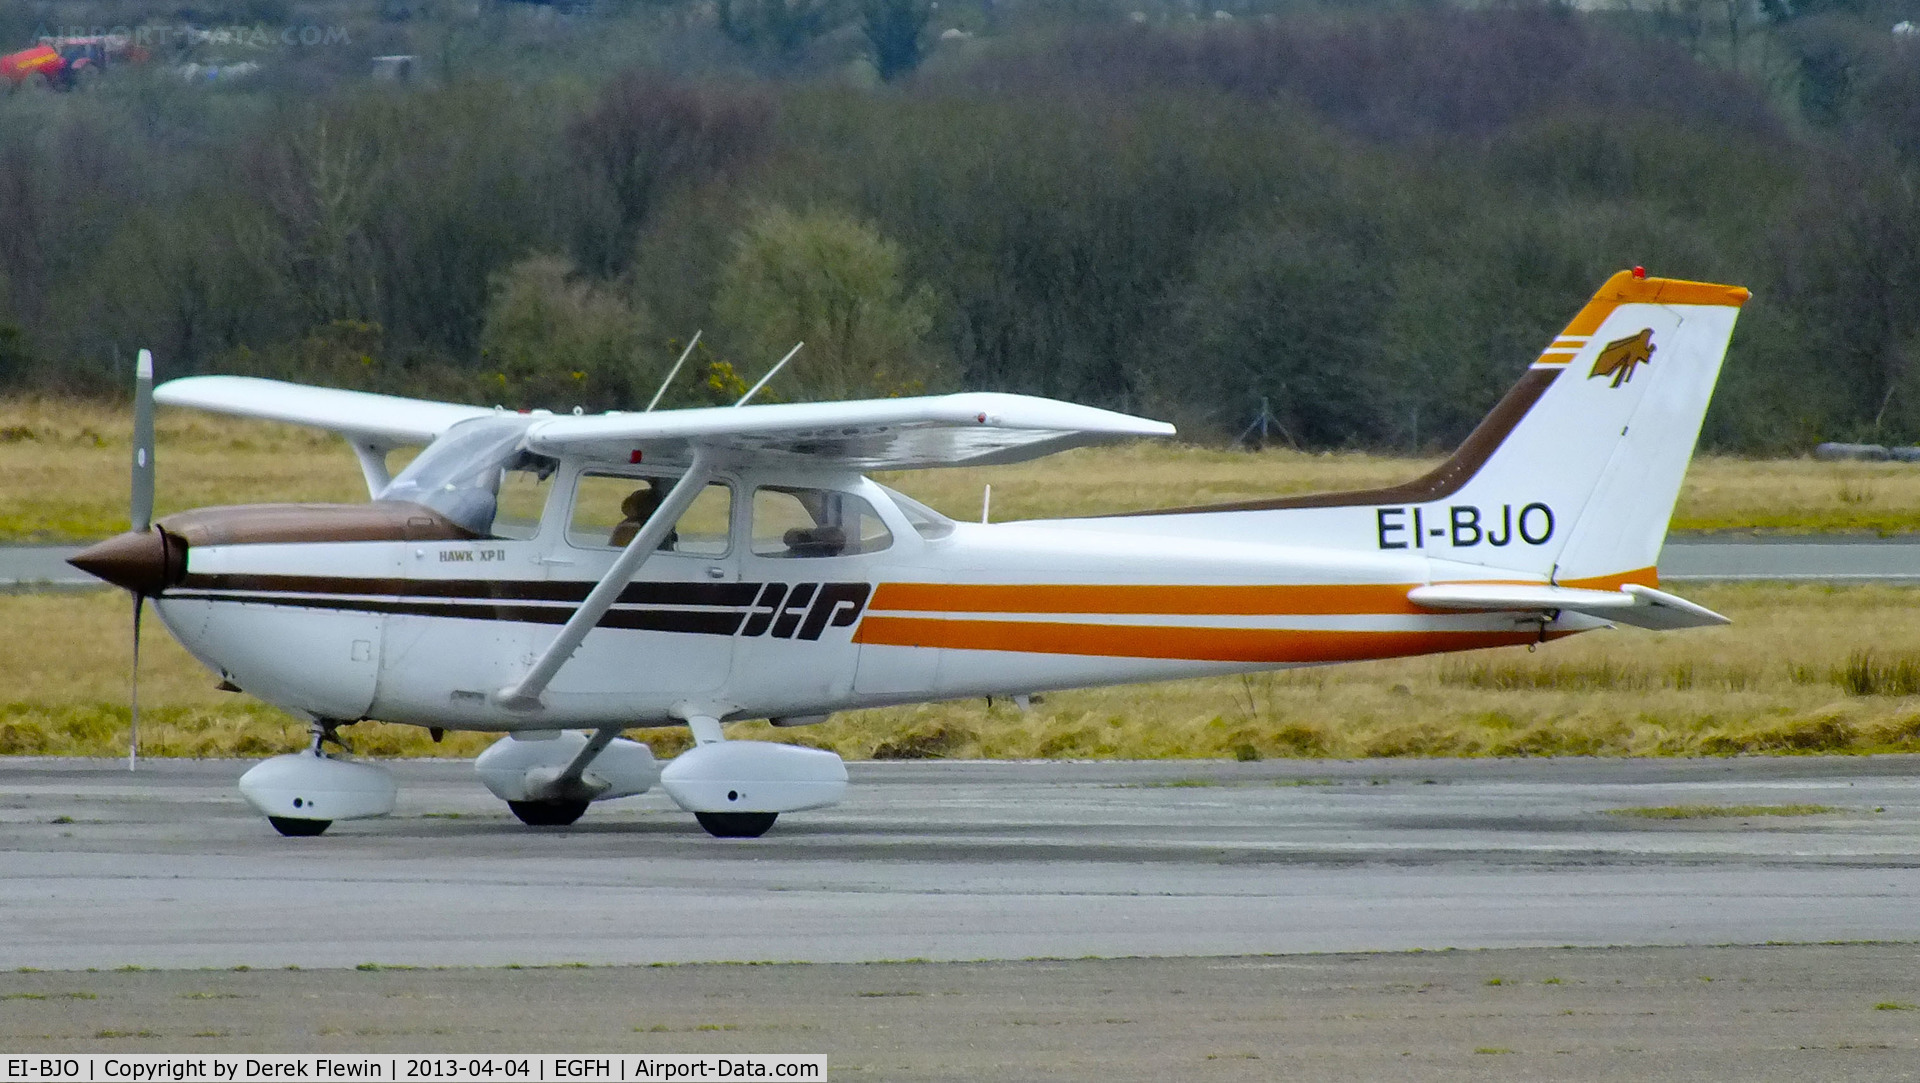 EI-BJO, Cessna R172K Hawk XP C/N R1723340, Visiting Cessna, departed EGFH at for EICM at 1300.